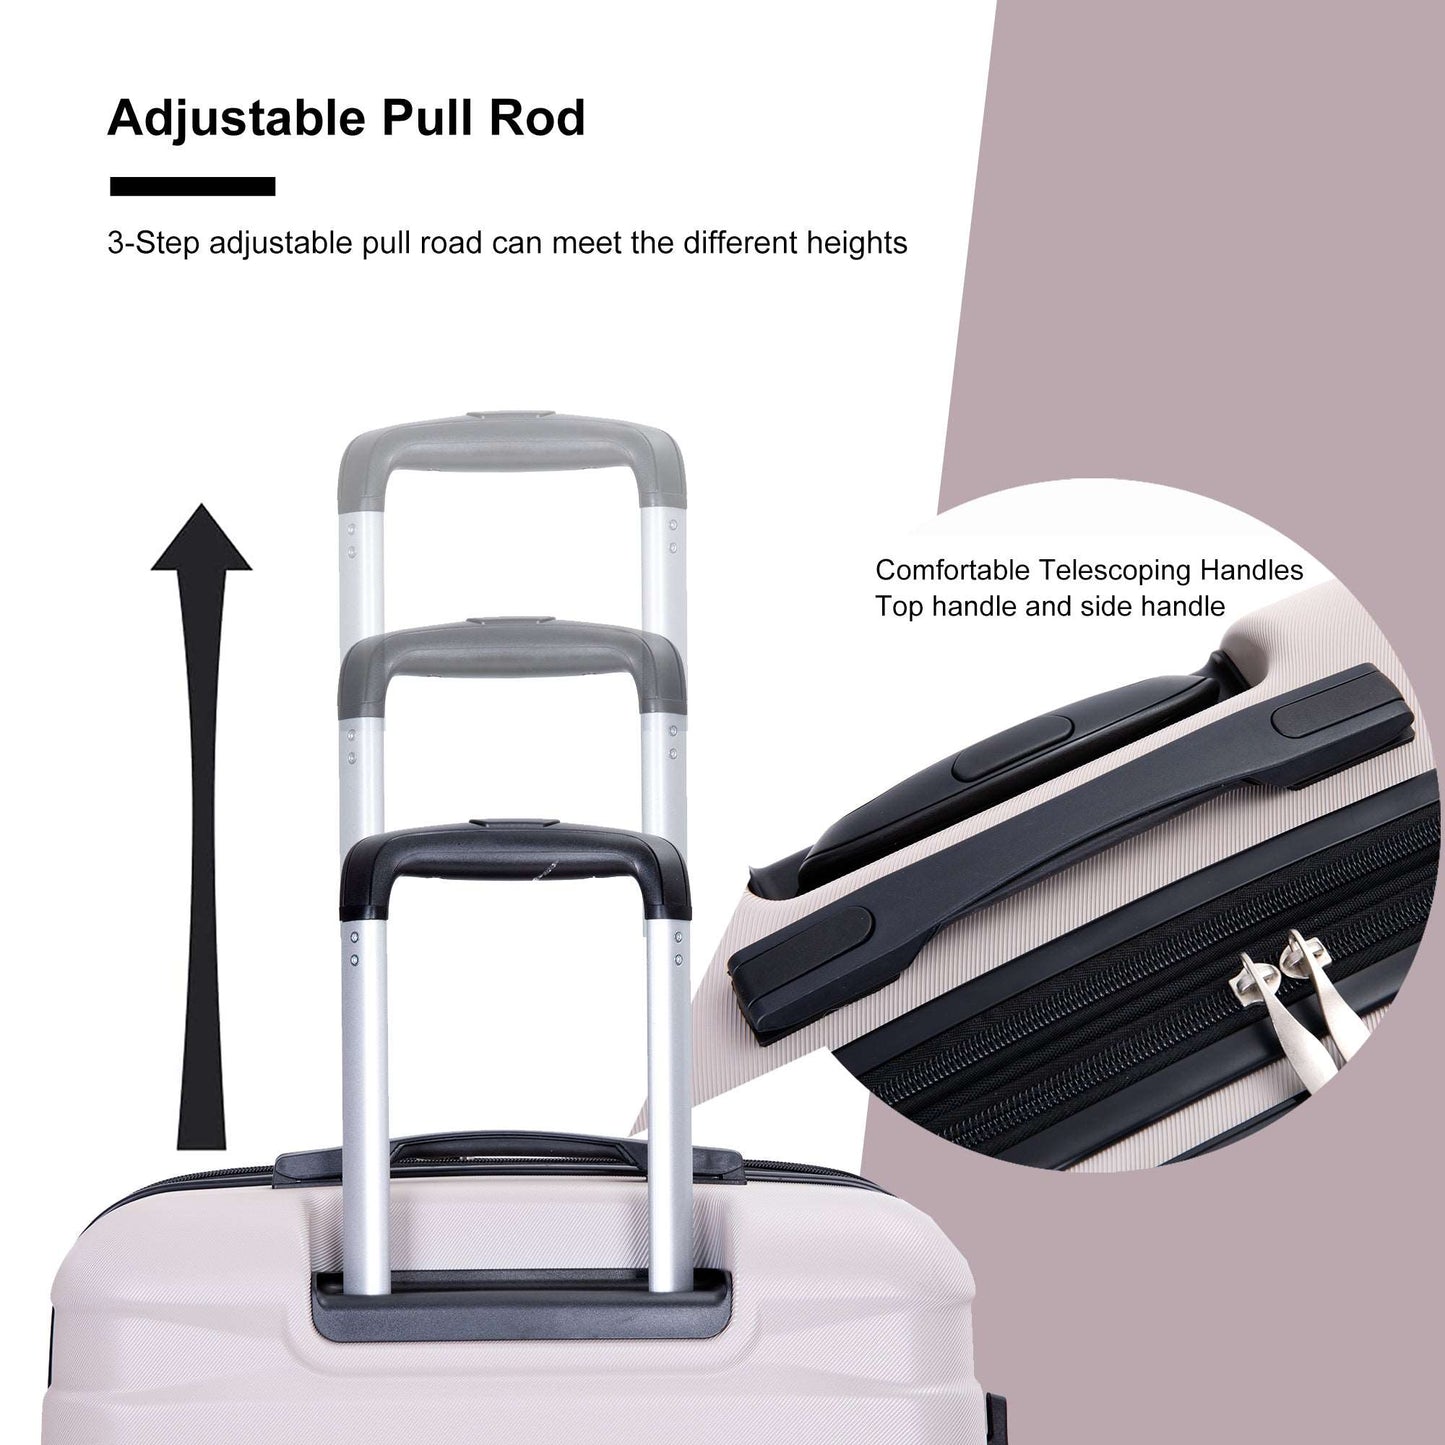 3 Piece Luggage Sets PC Lightweight & Durable Expandable Suitcase with Two Hooks, Double Spinner Wheels, TSA Lock, (21/25/29)